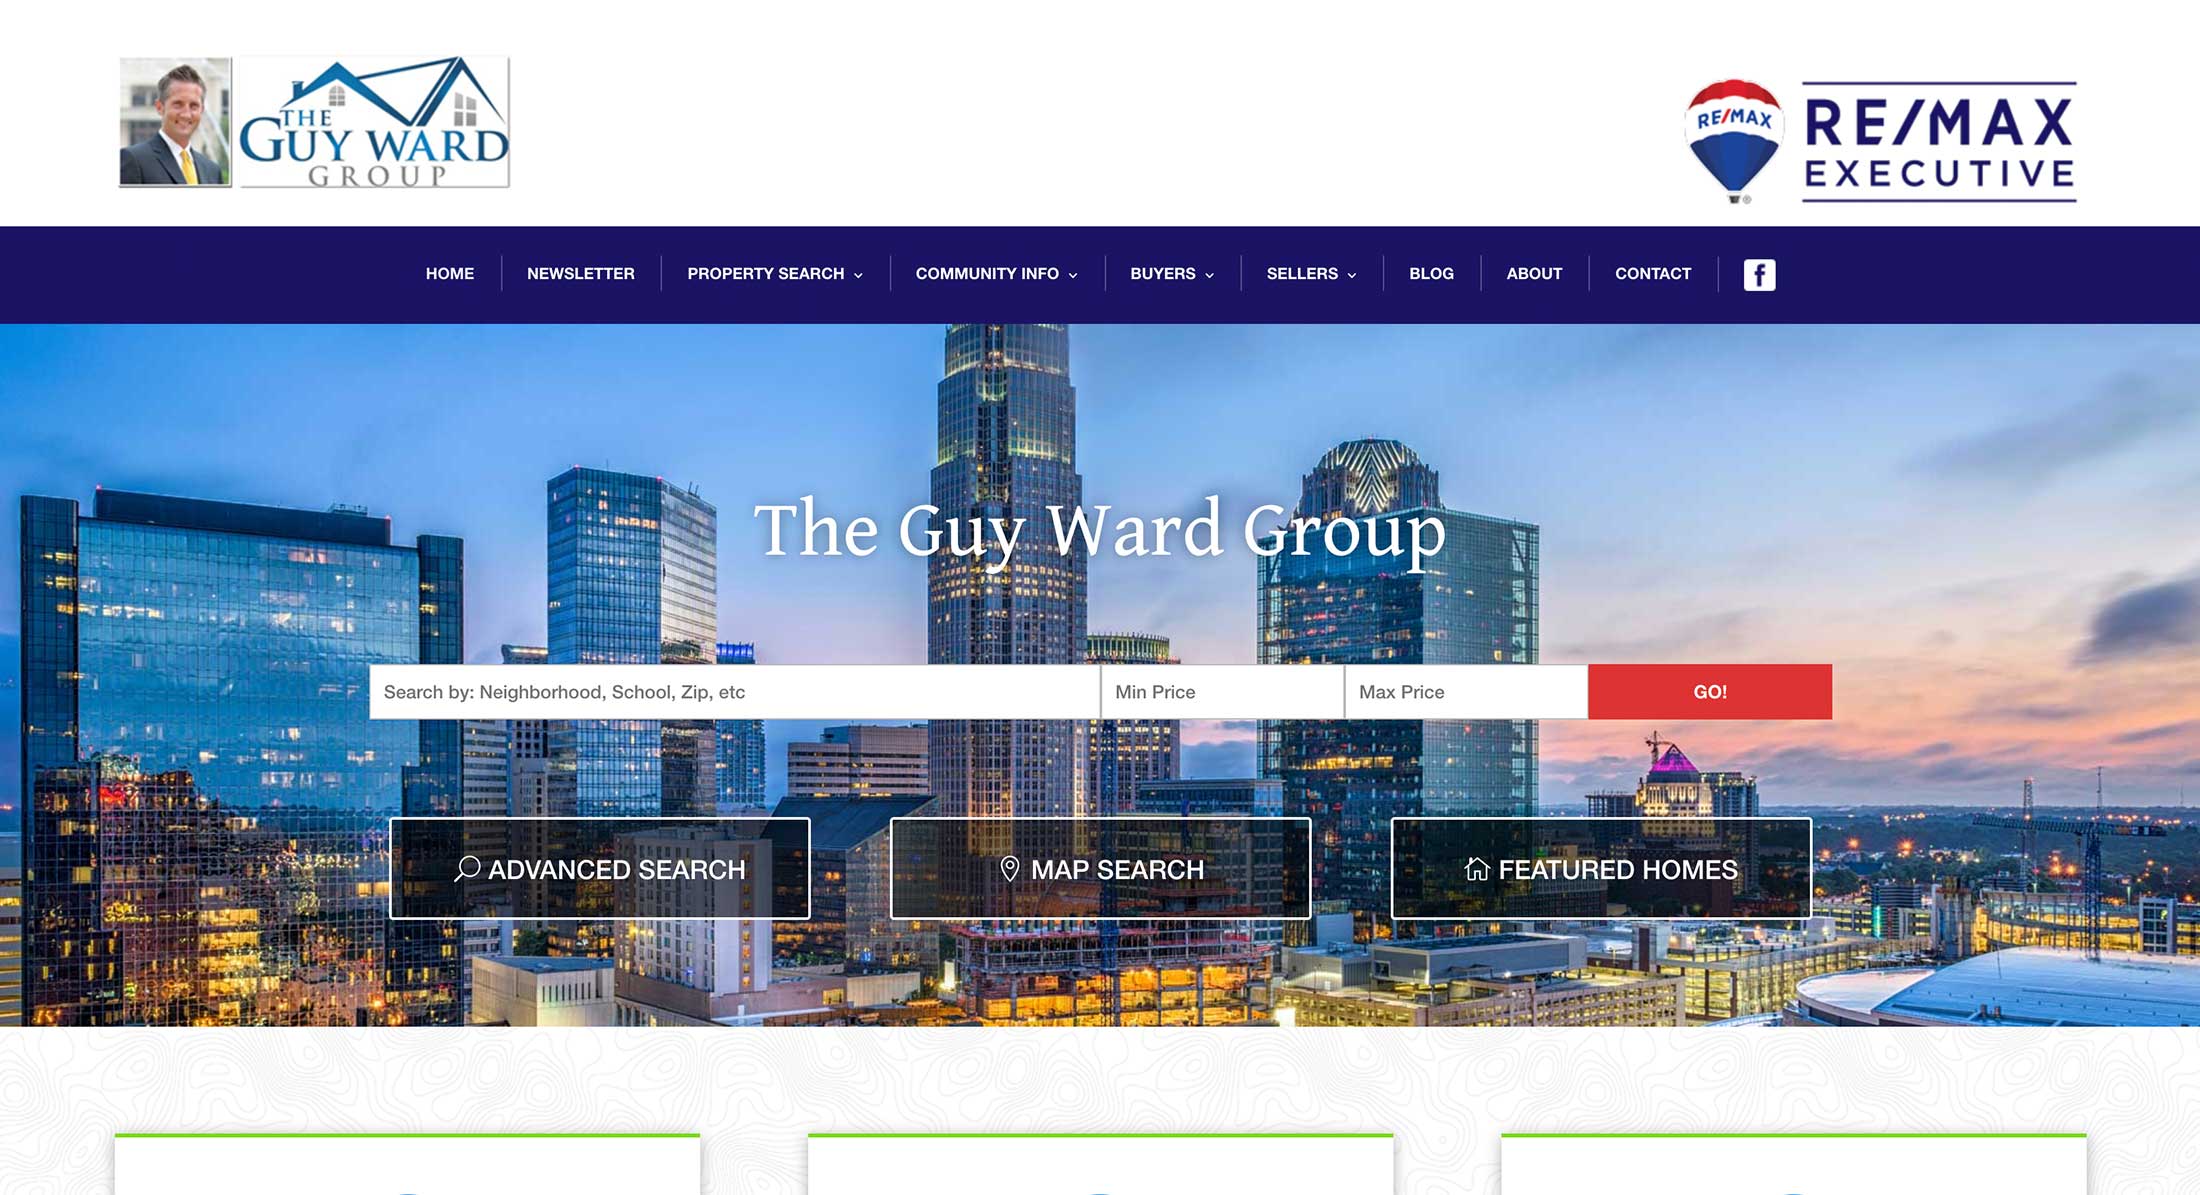 The Guy Ward Group